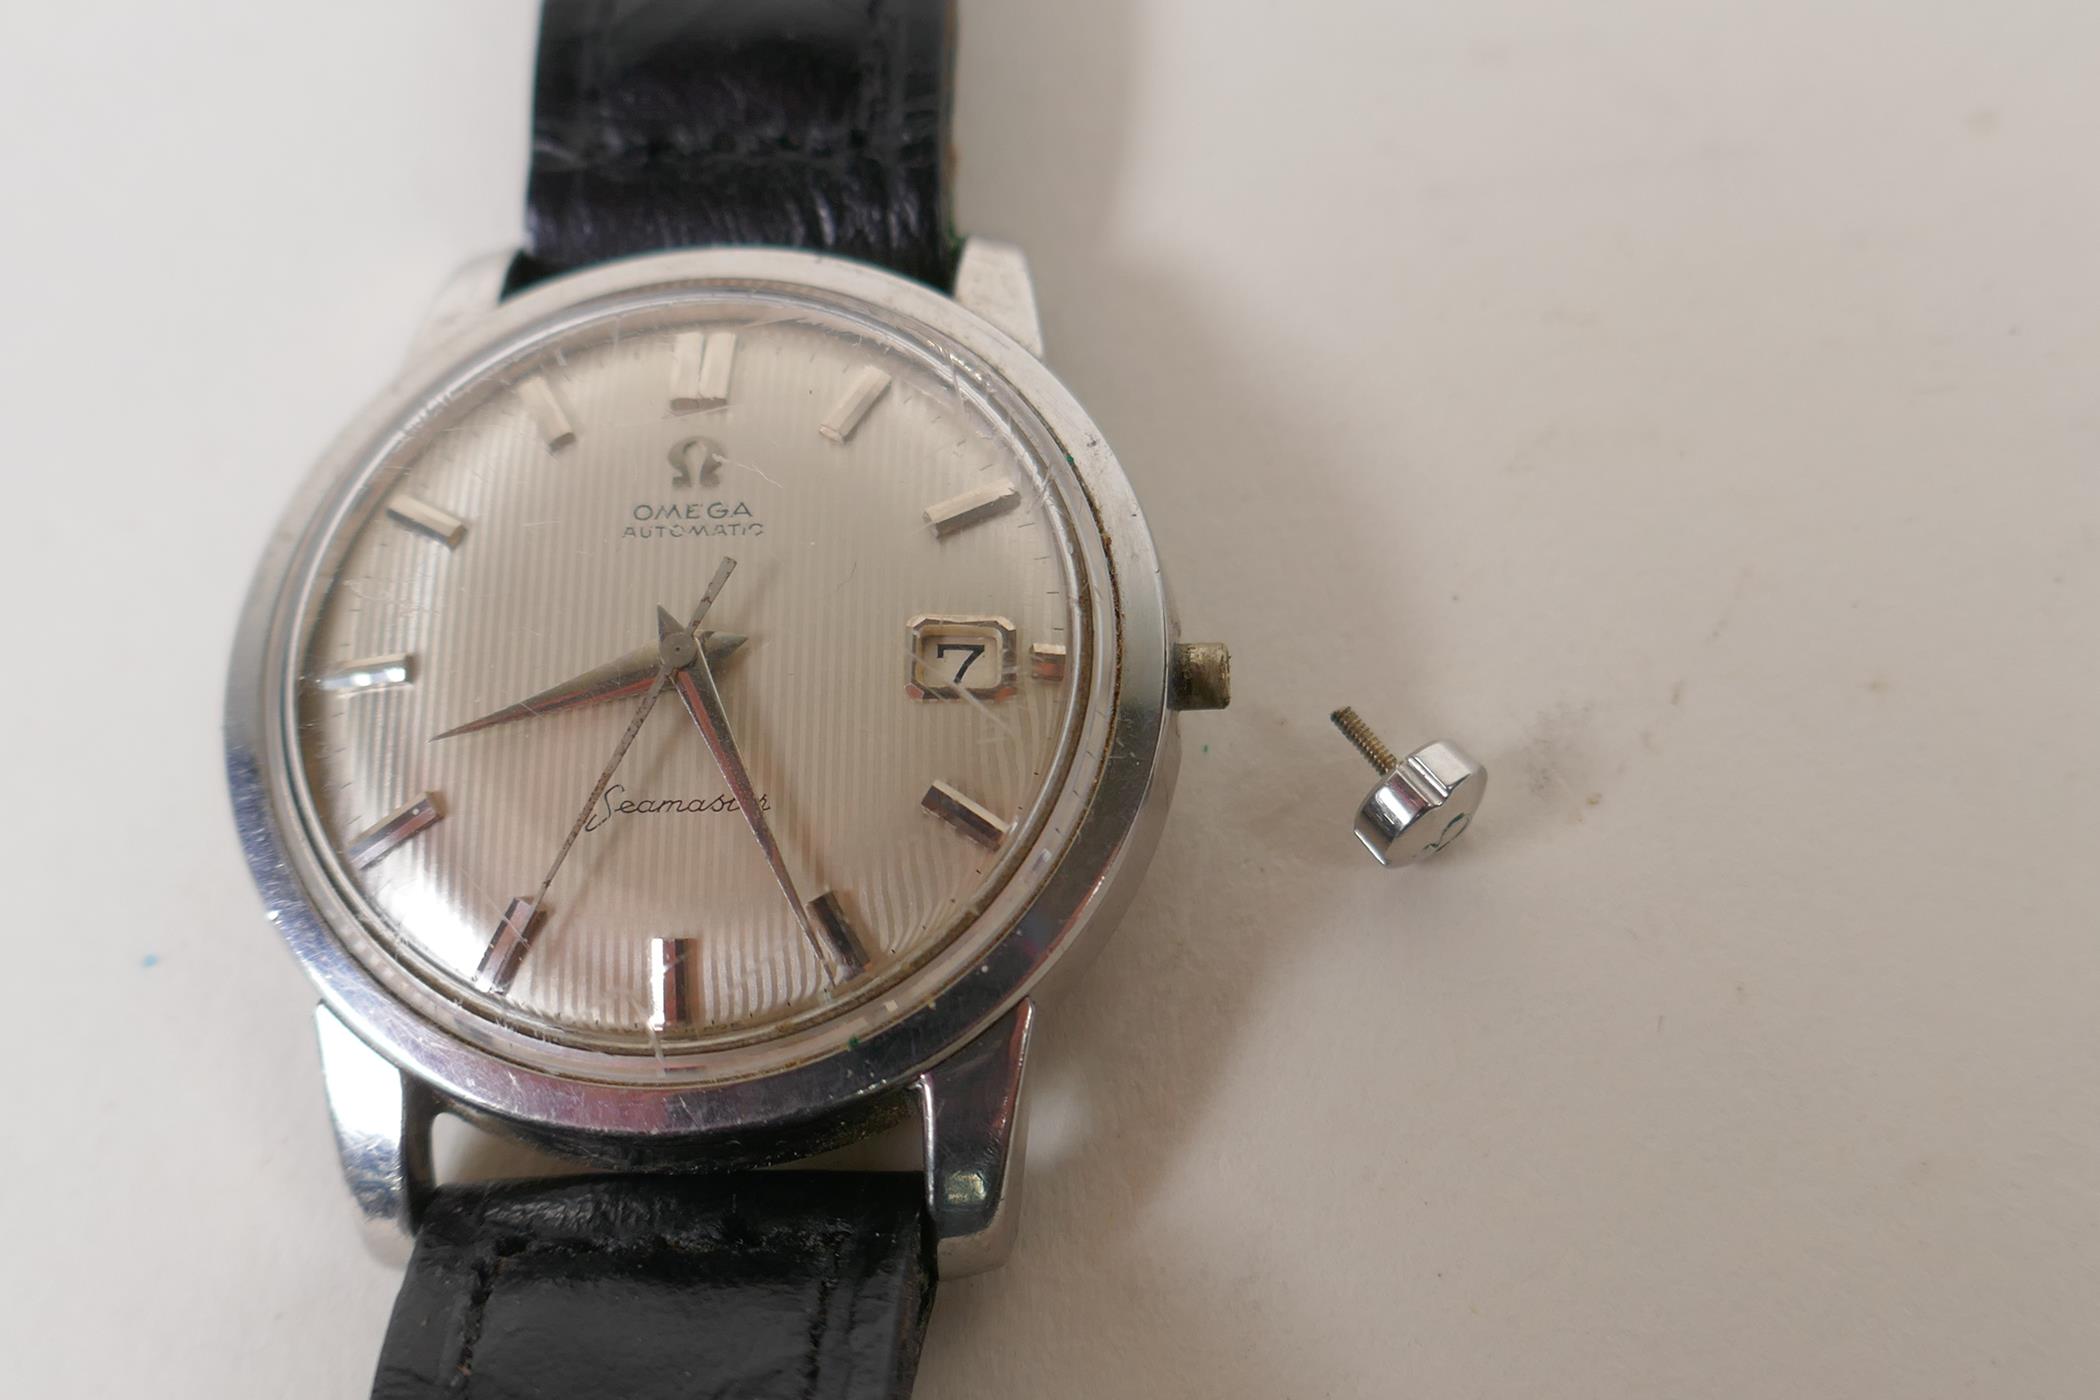 An Omega Seamaster wrist watch with date aperture, a/f - Image 6 of 6